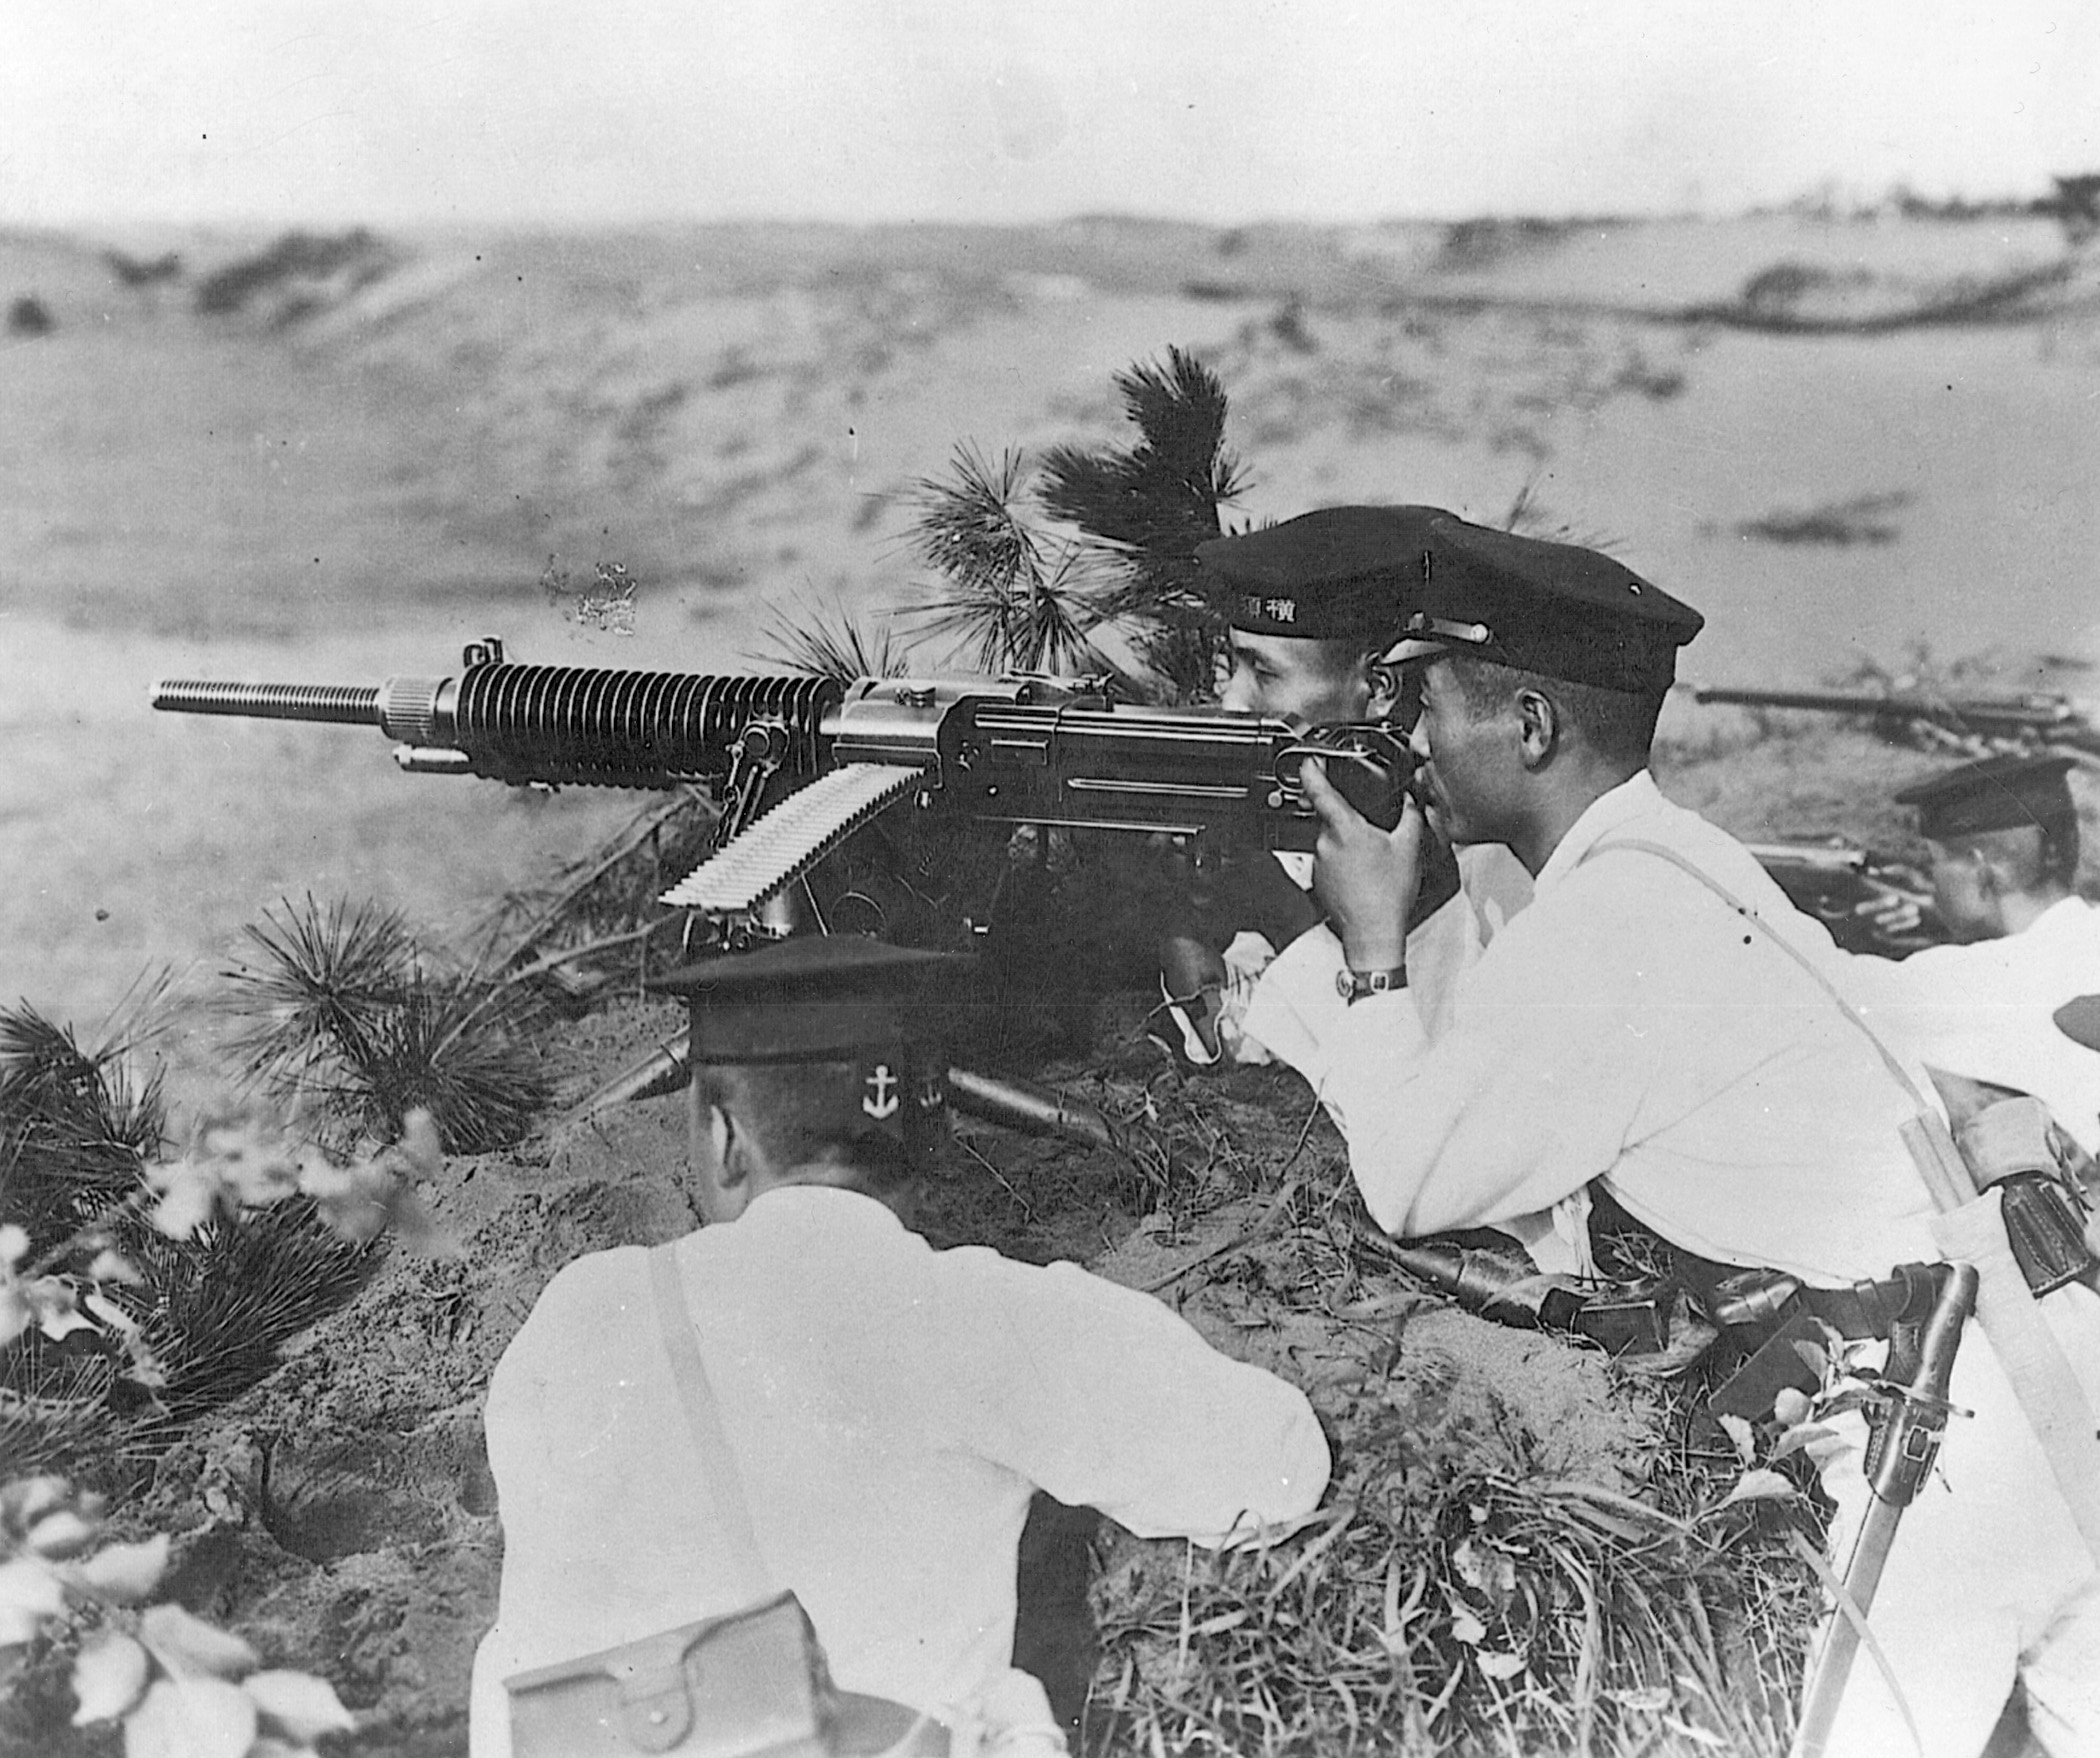 Clad in white uniforms and dress caps, Japanese soldiers fire a Nambu machine gun. Possibly a memento from his training days, this photo was found on the body of a dead Japanese soldier on Guadalcanal. 